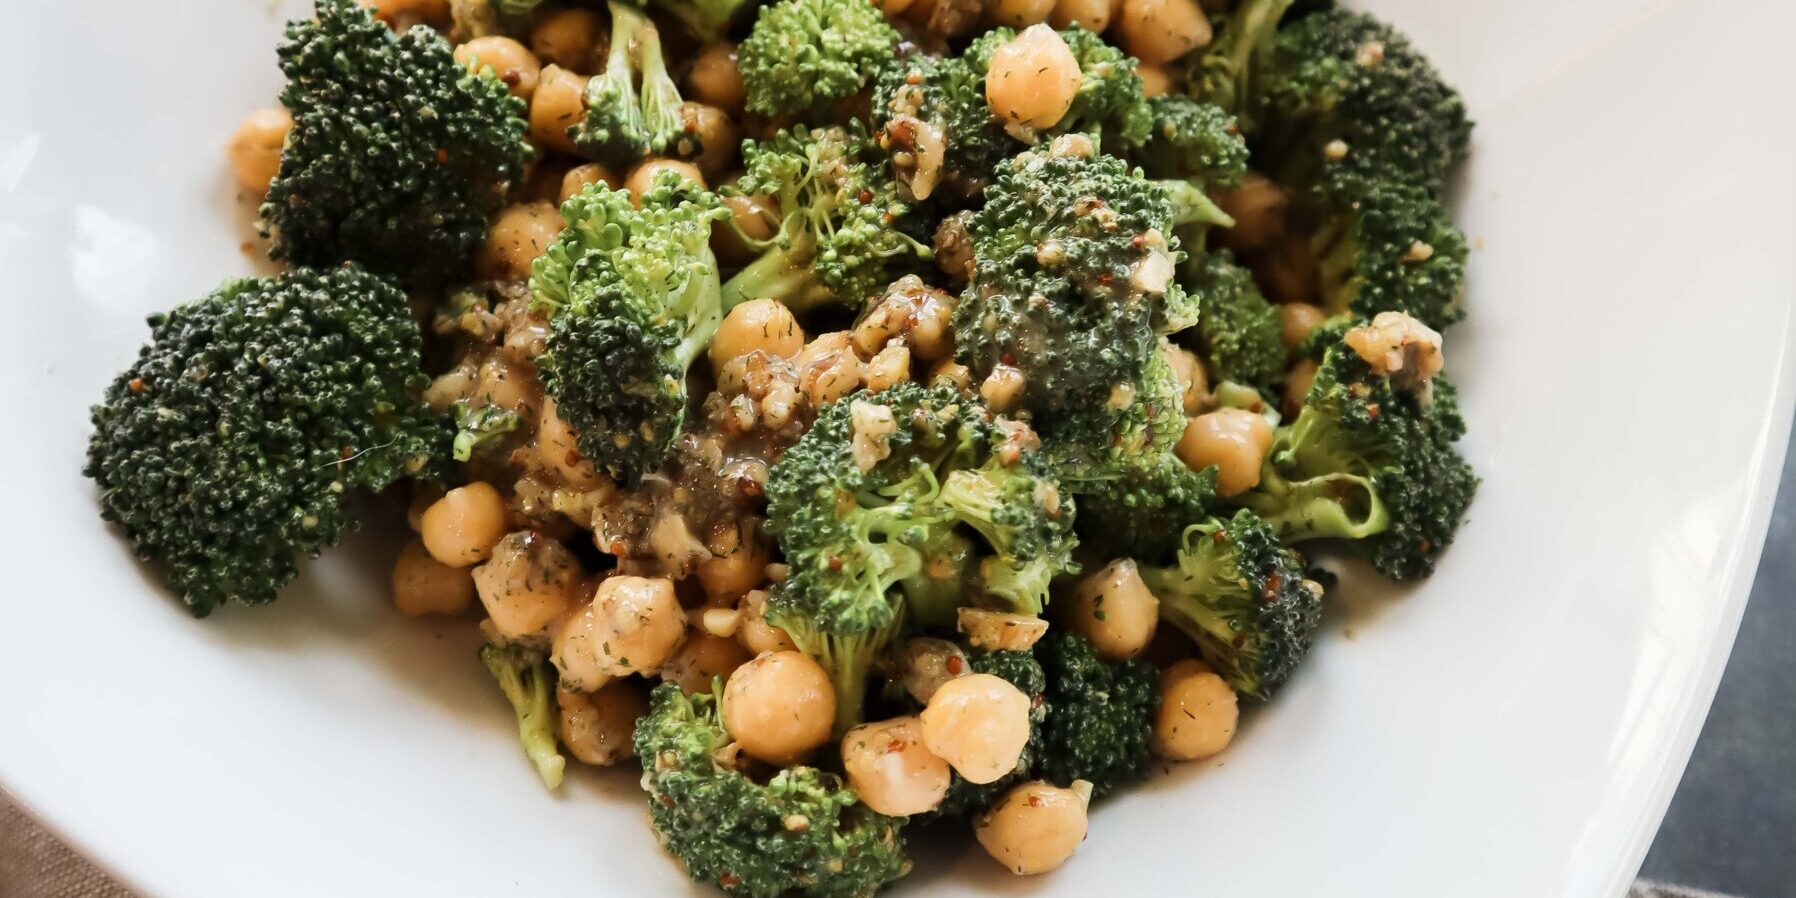 broccoli, walnuts, and chickpeas mixed i white bowl with mustard dressing photographed on cloth next to super easy plant-based cookbook